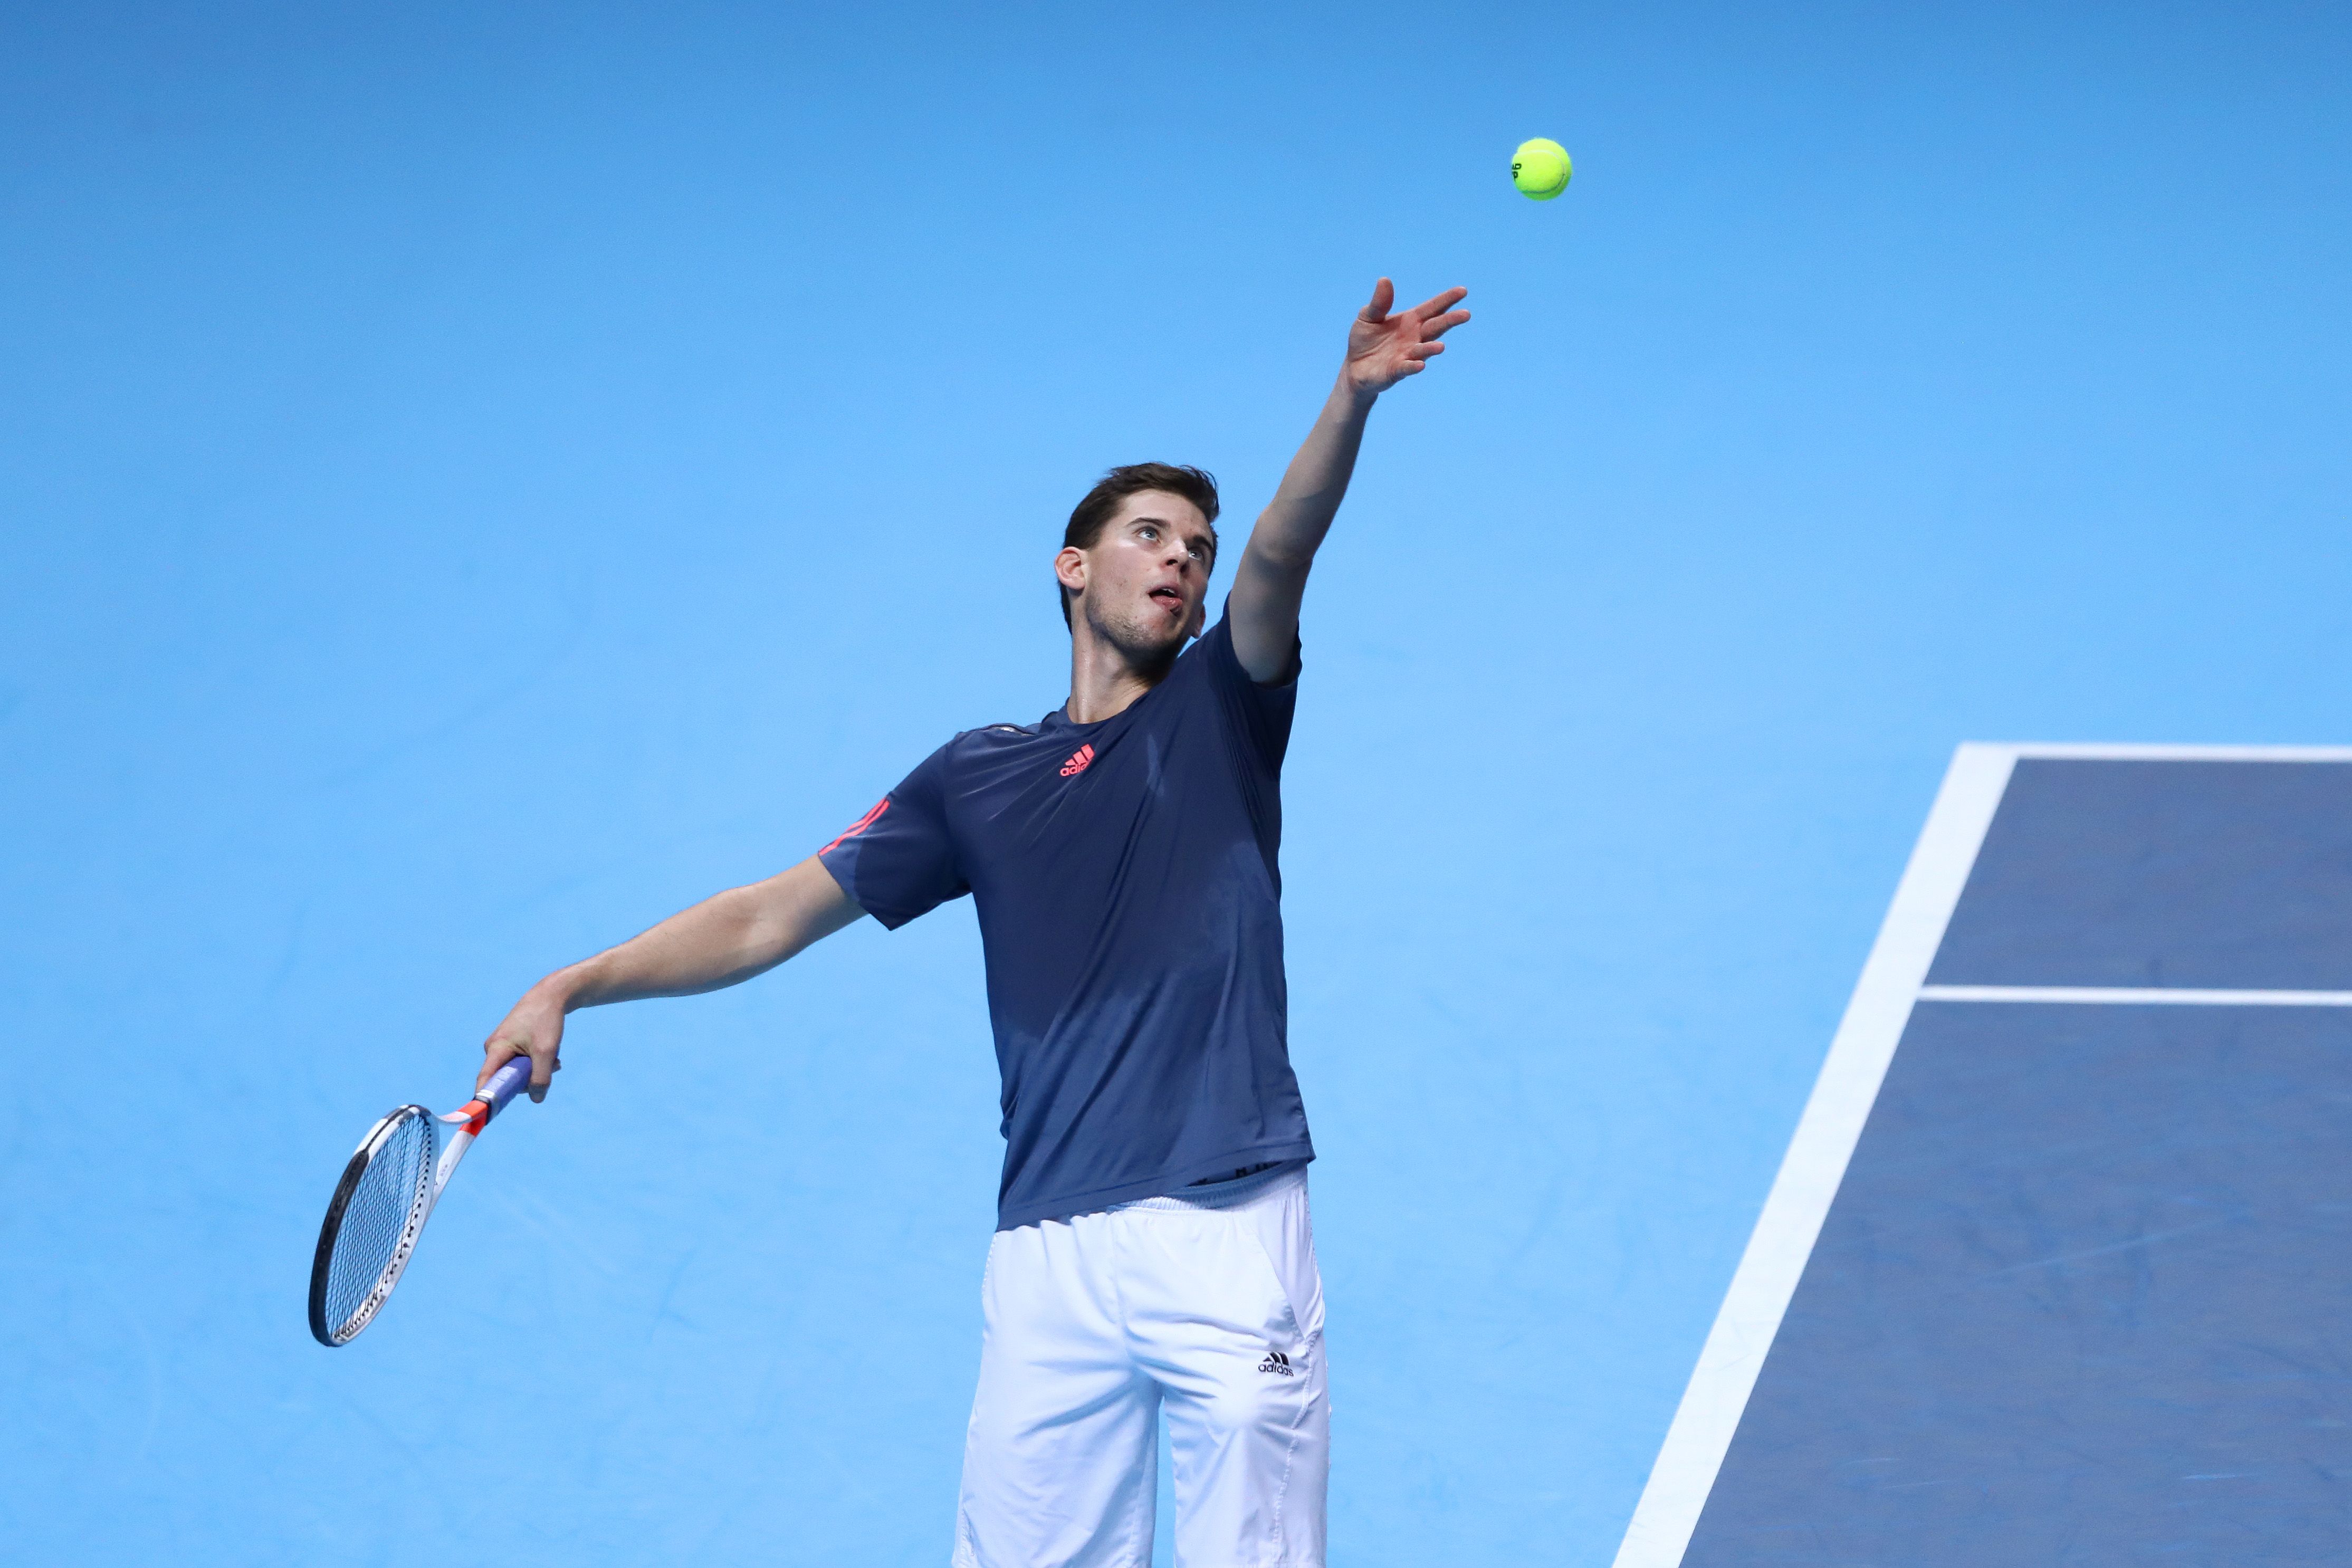 ATP Tour - Dominic Thiem is Mover of the Week in the Emirates ATP